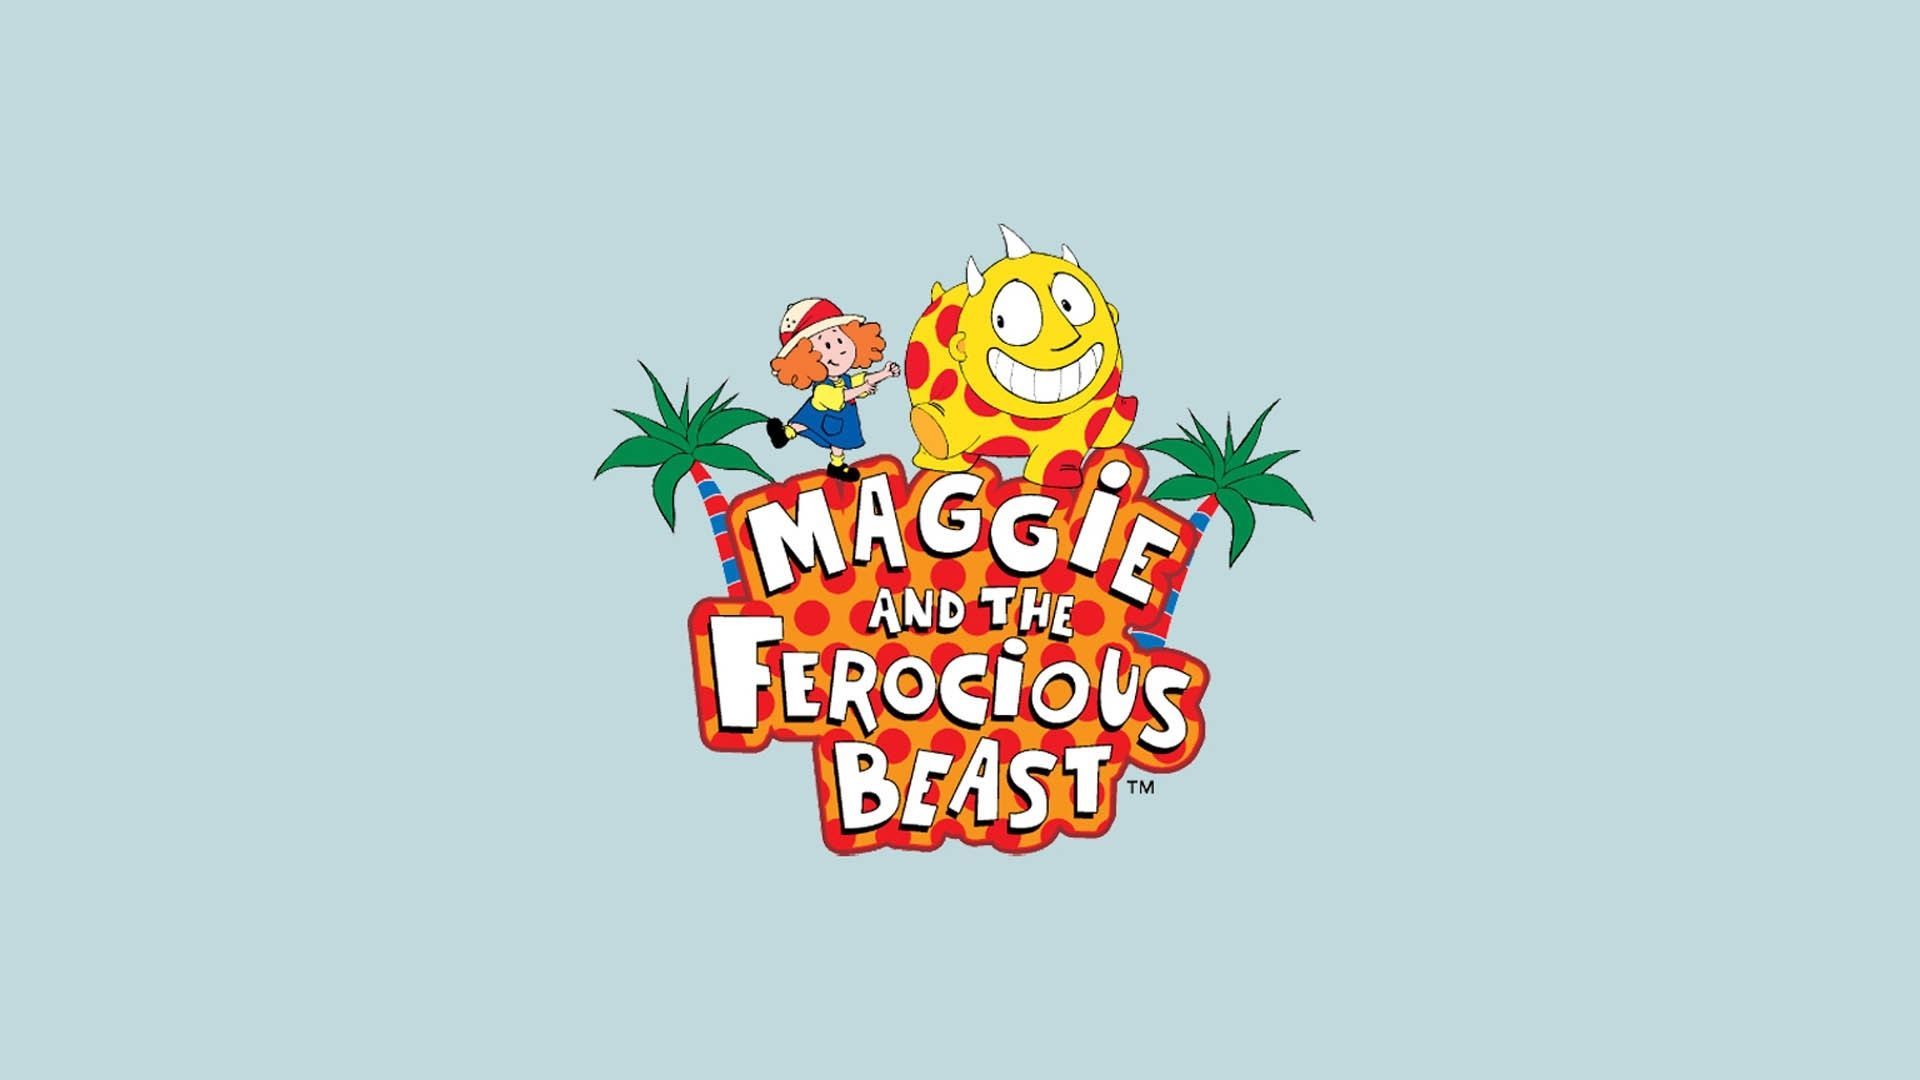 Maggie and the Ferocious Beast.